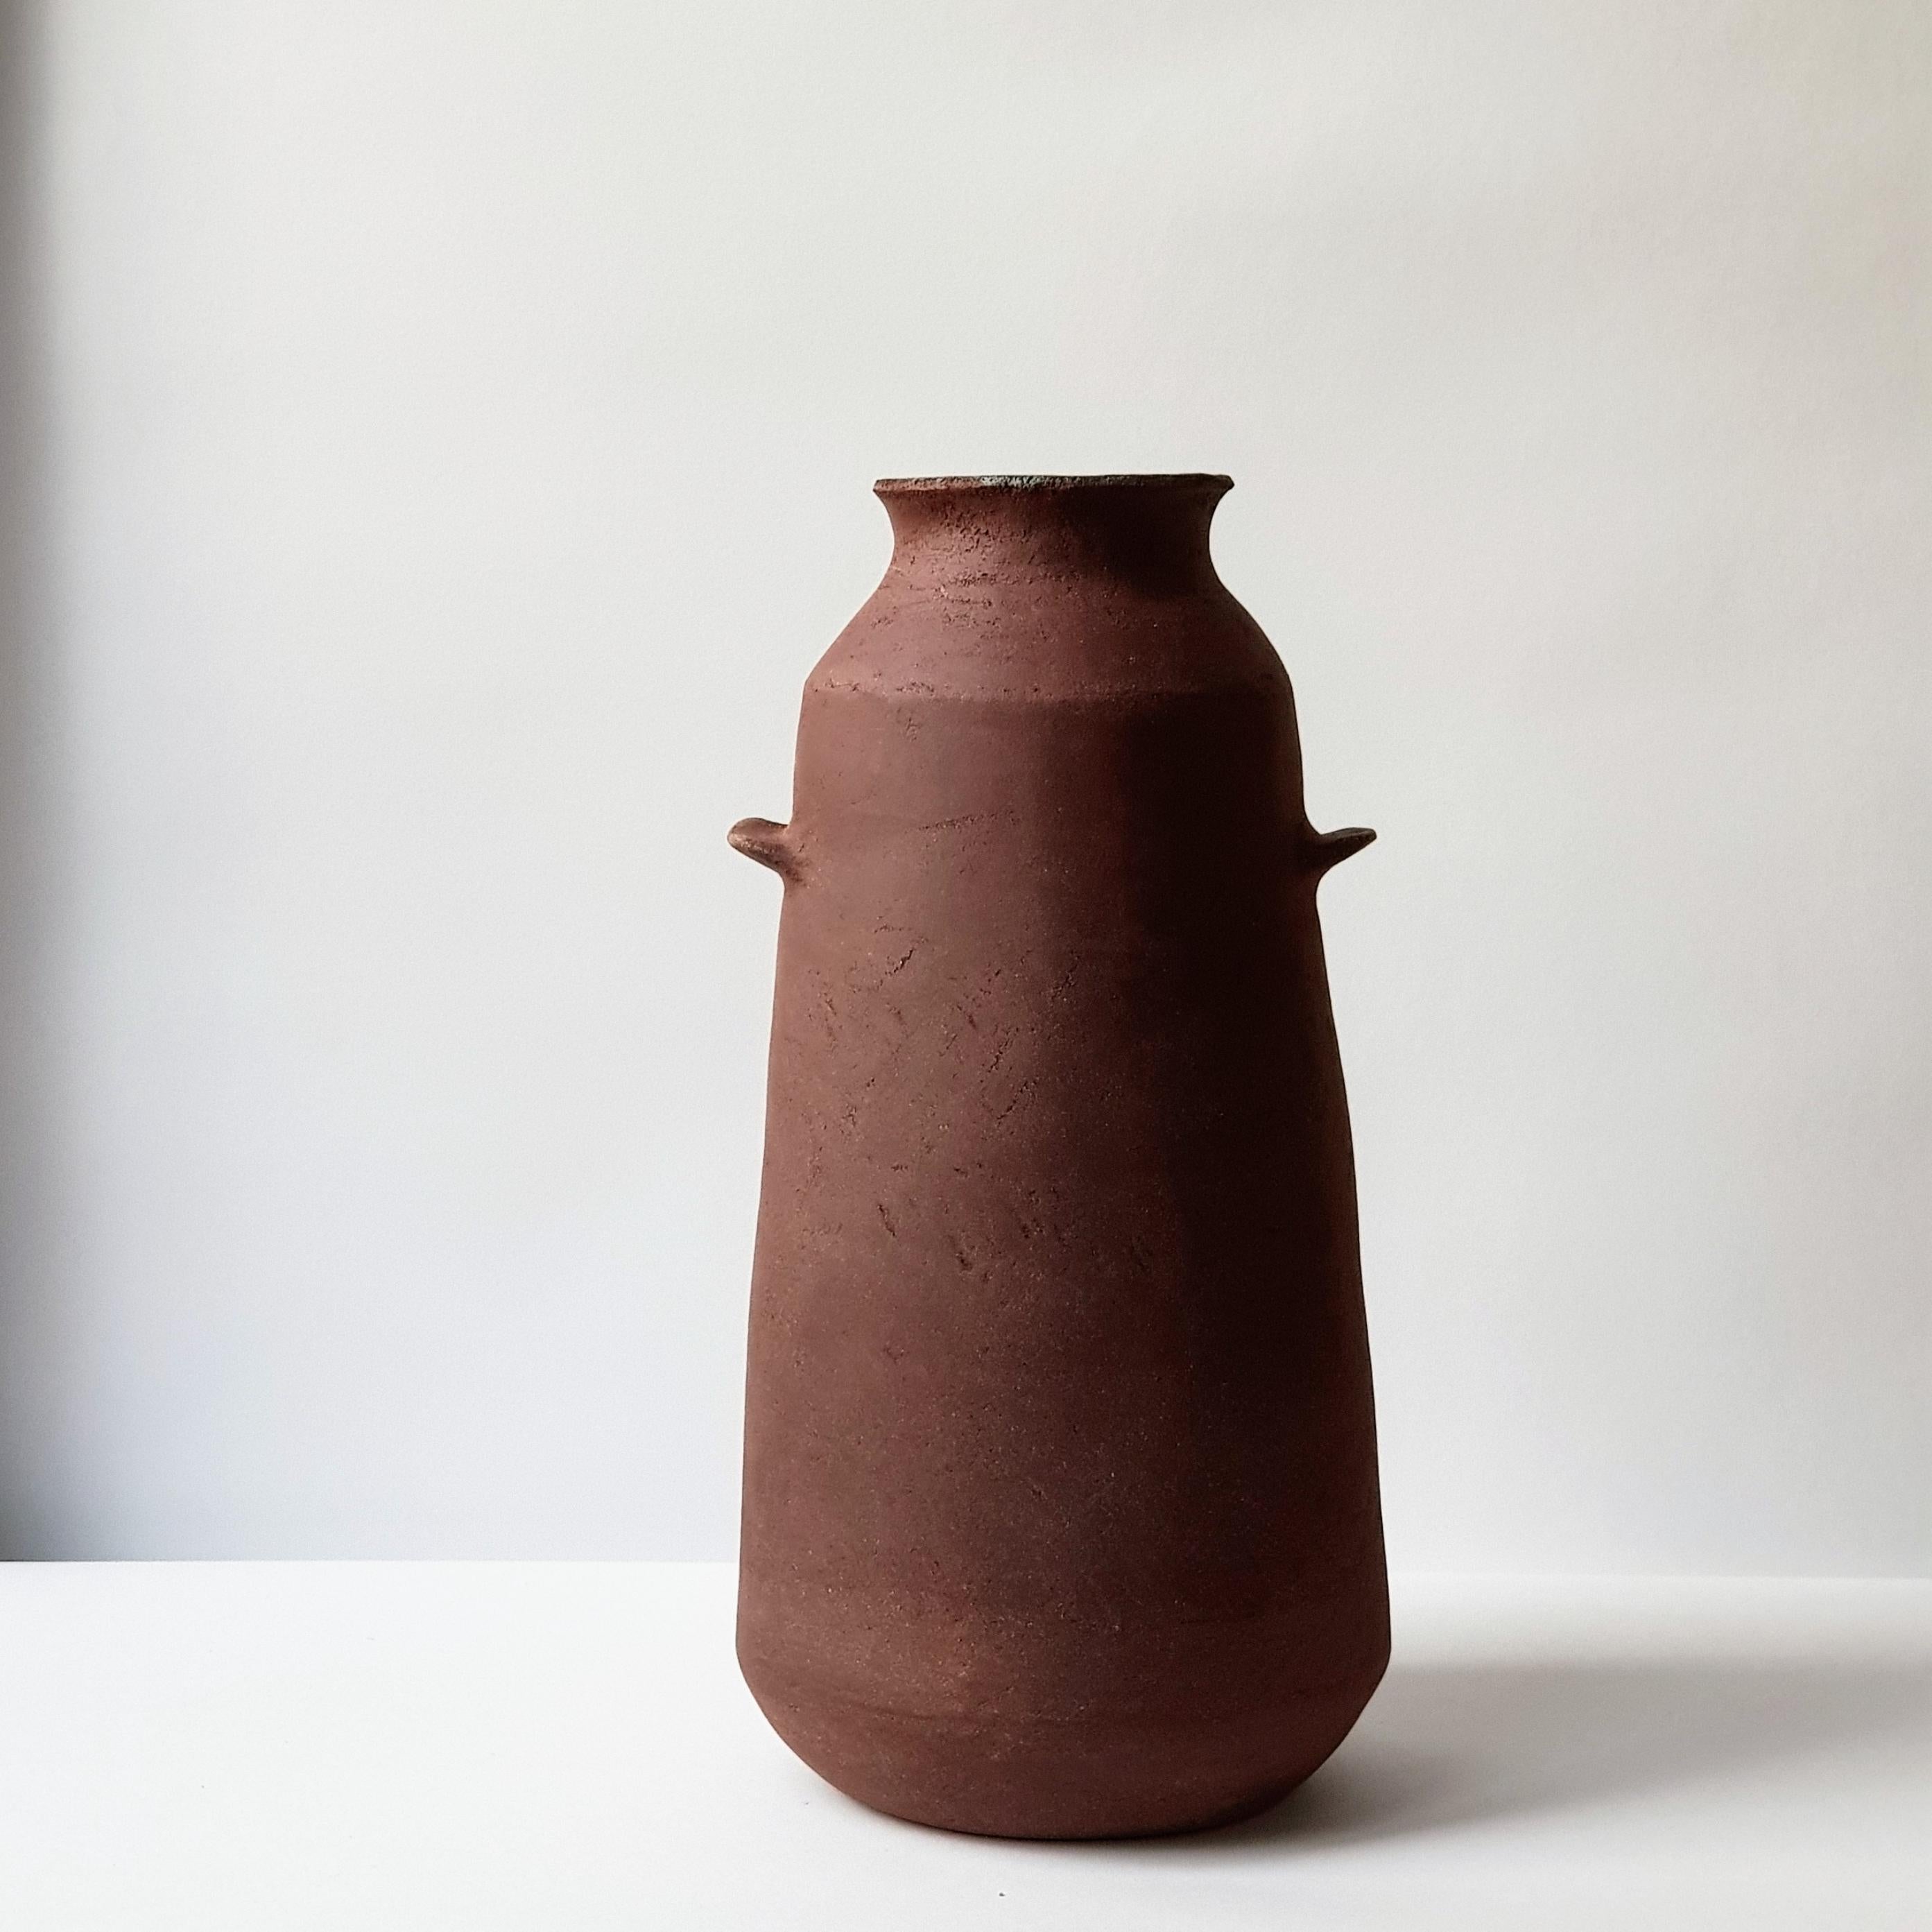 Red Stoneware Alavastron Vase by Elena Vasilantonaki
Unique
Dimensions: ⌀ 20 x H 40 cm (Dimensions may vary)
Materials: Stoneware
Available finishes: White, Red, Black, Brown, Black, White Patina

Growing up in Greece I was surrounded by pottery